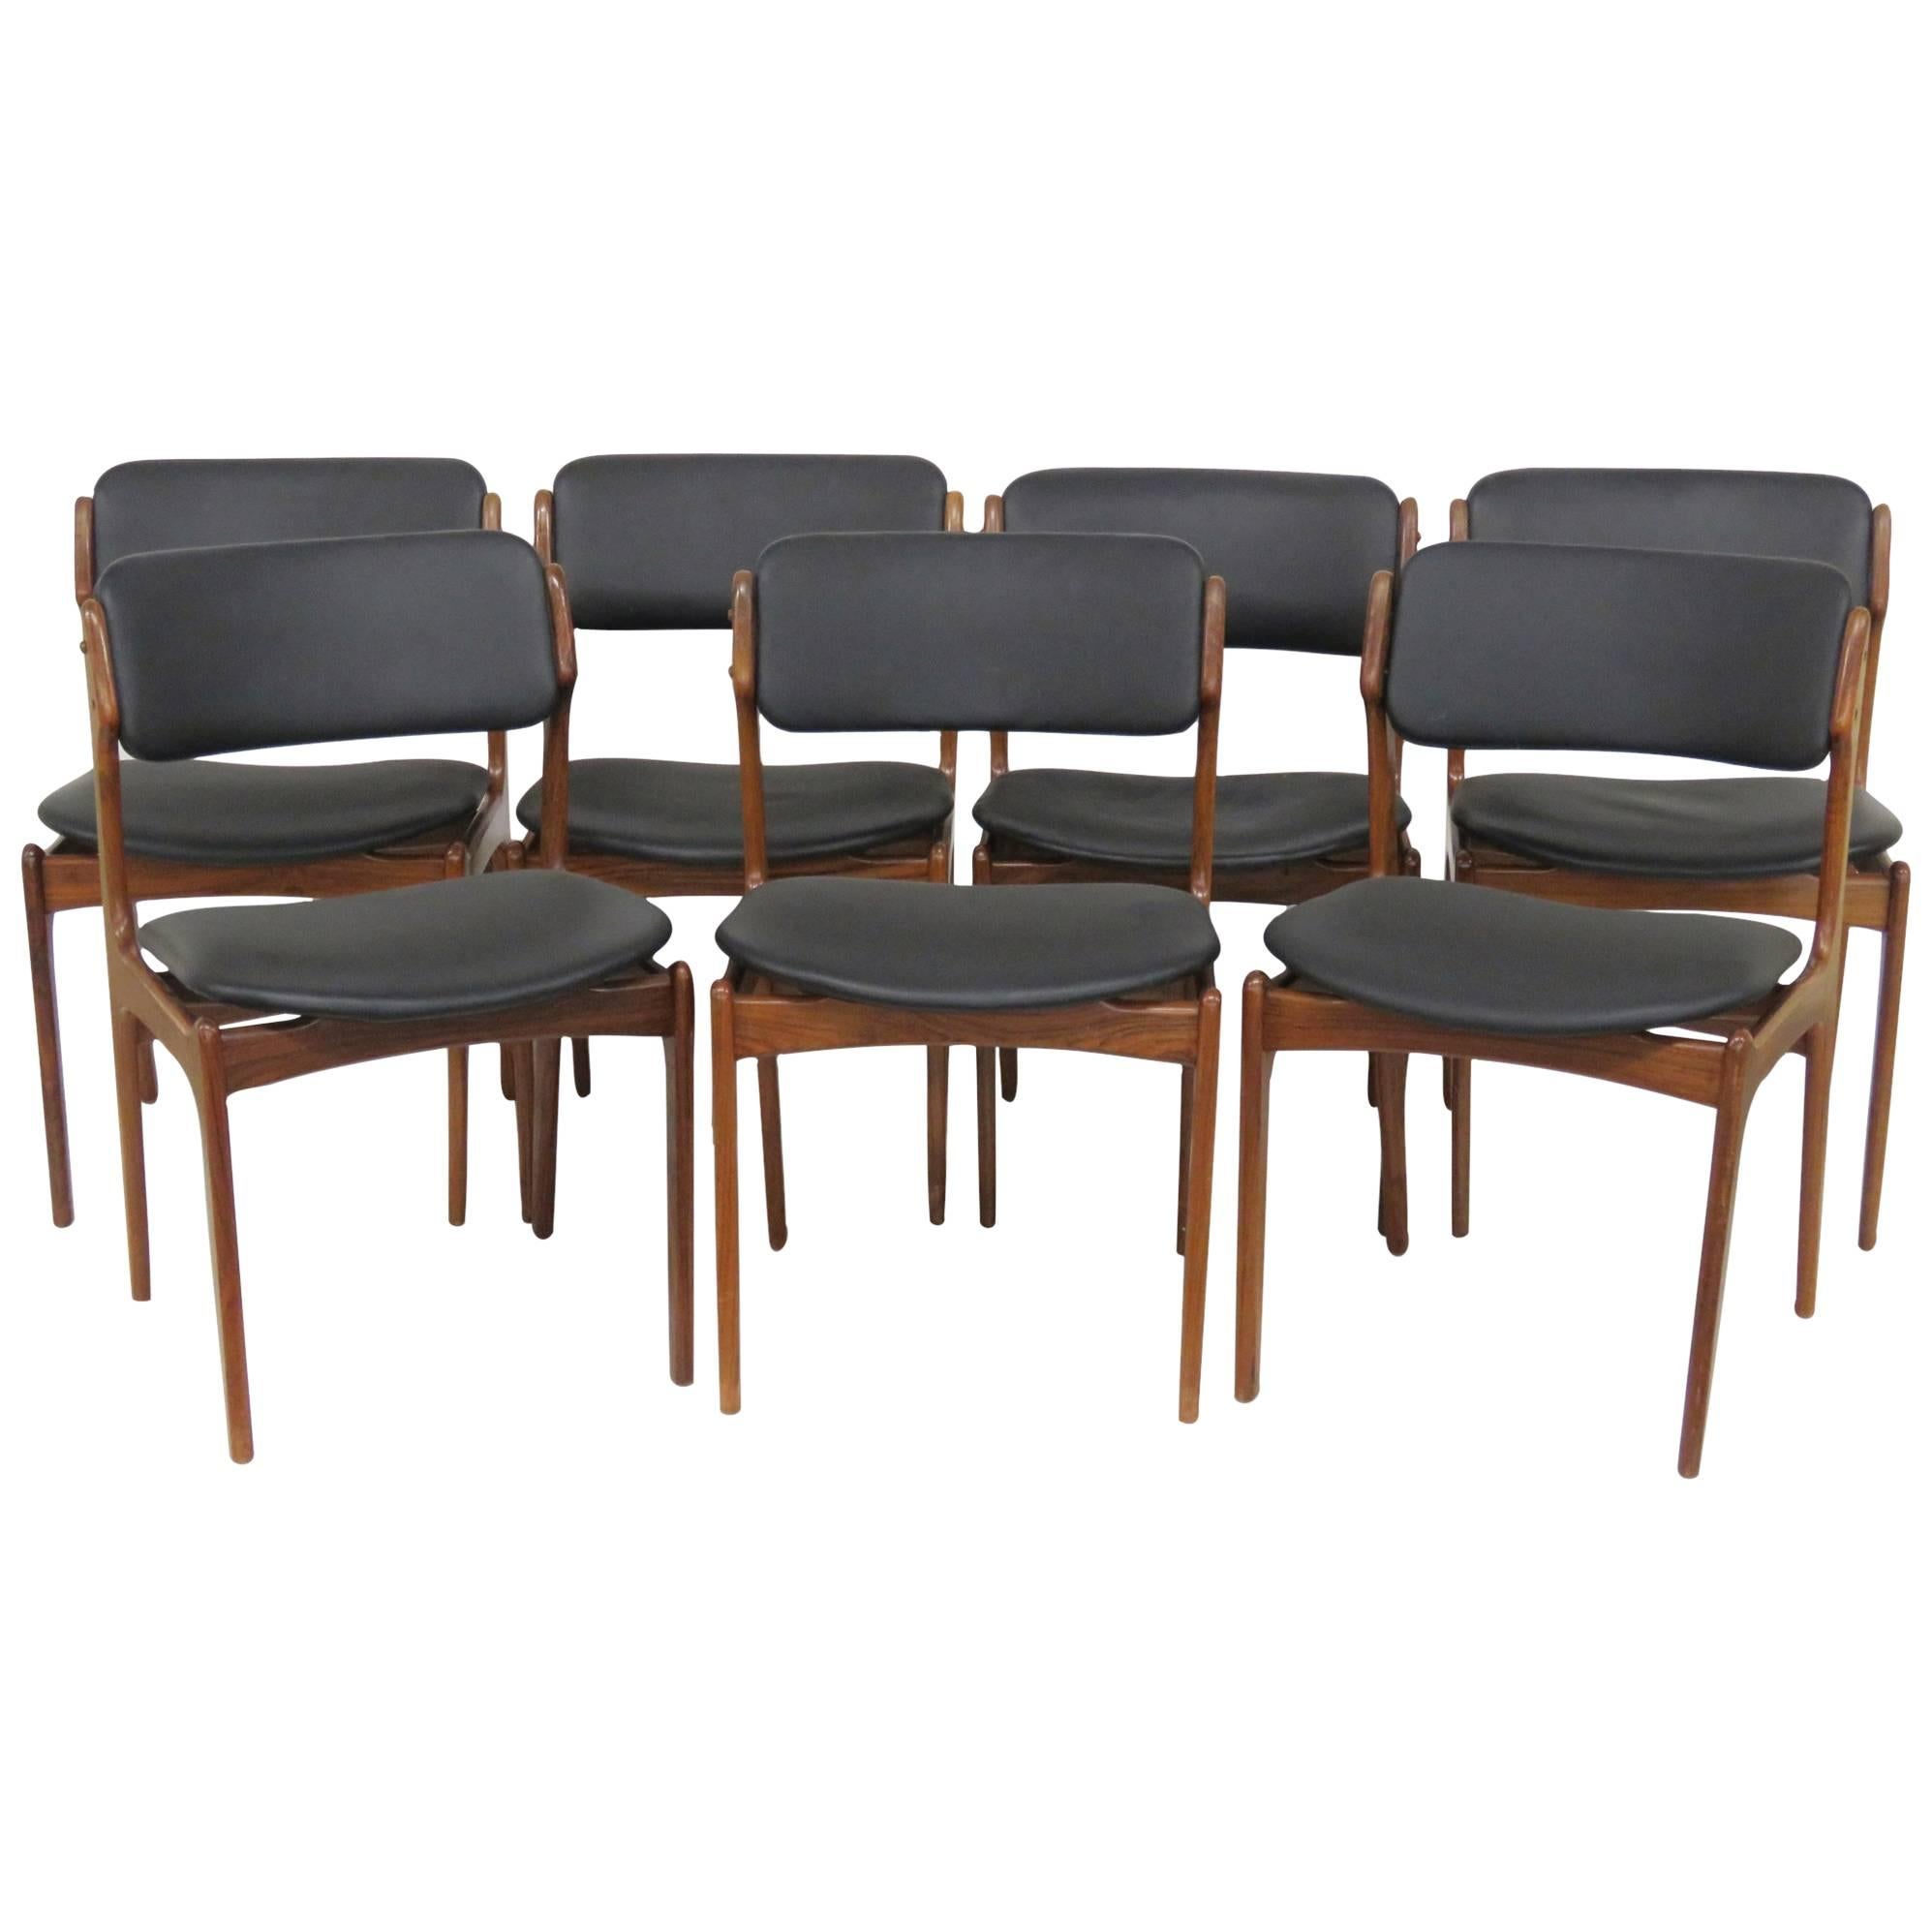 Seven Danish Modern Rosewood Dining Chairs